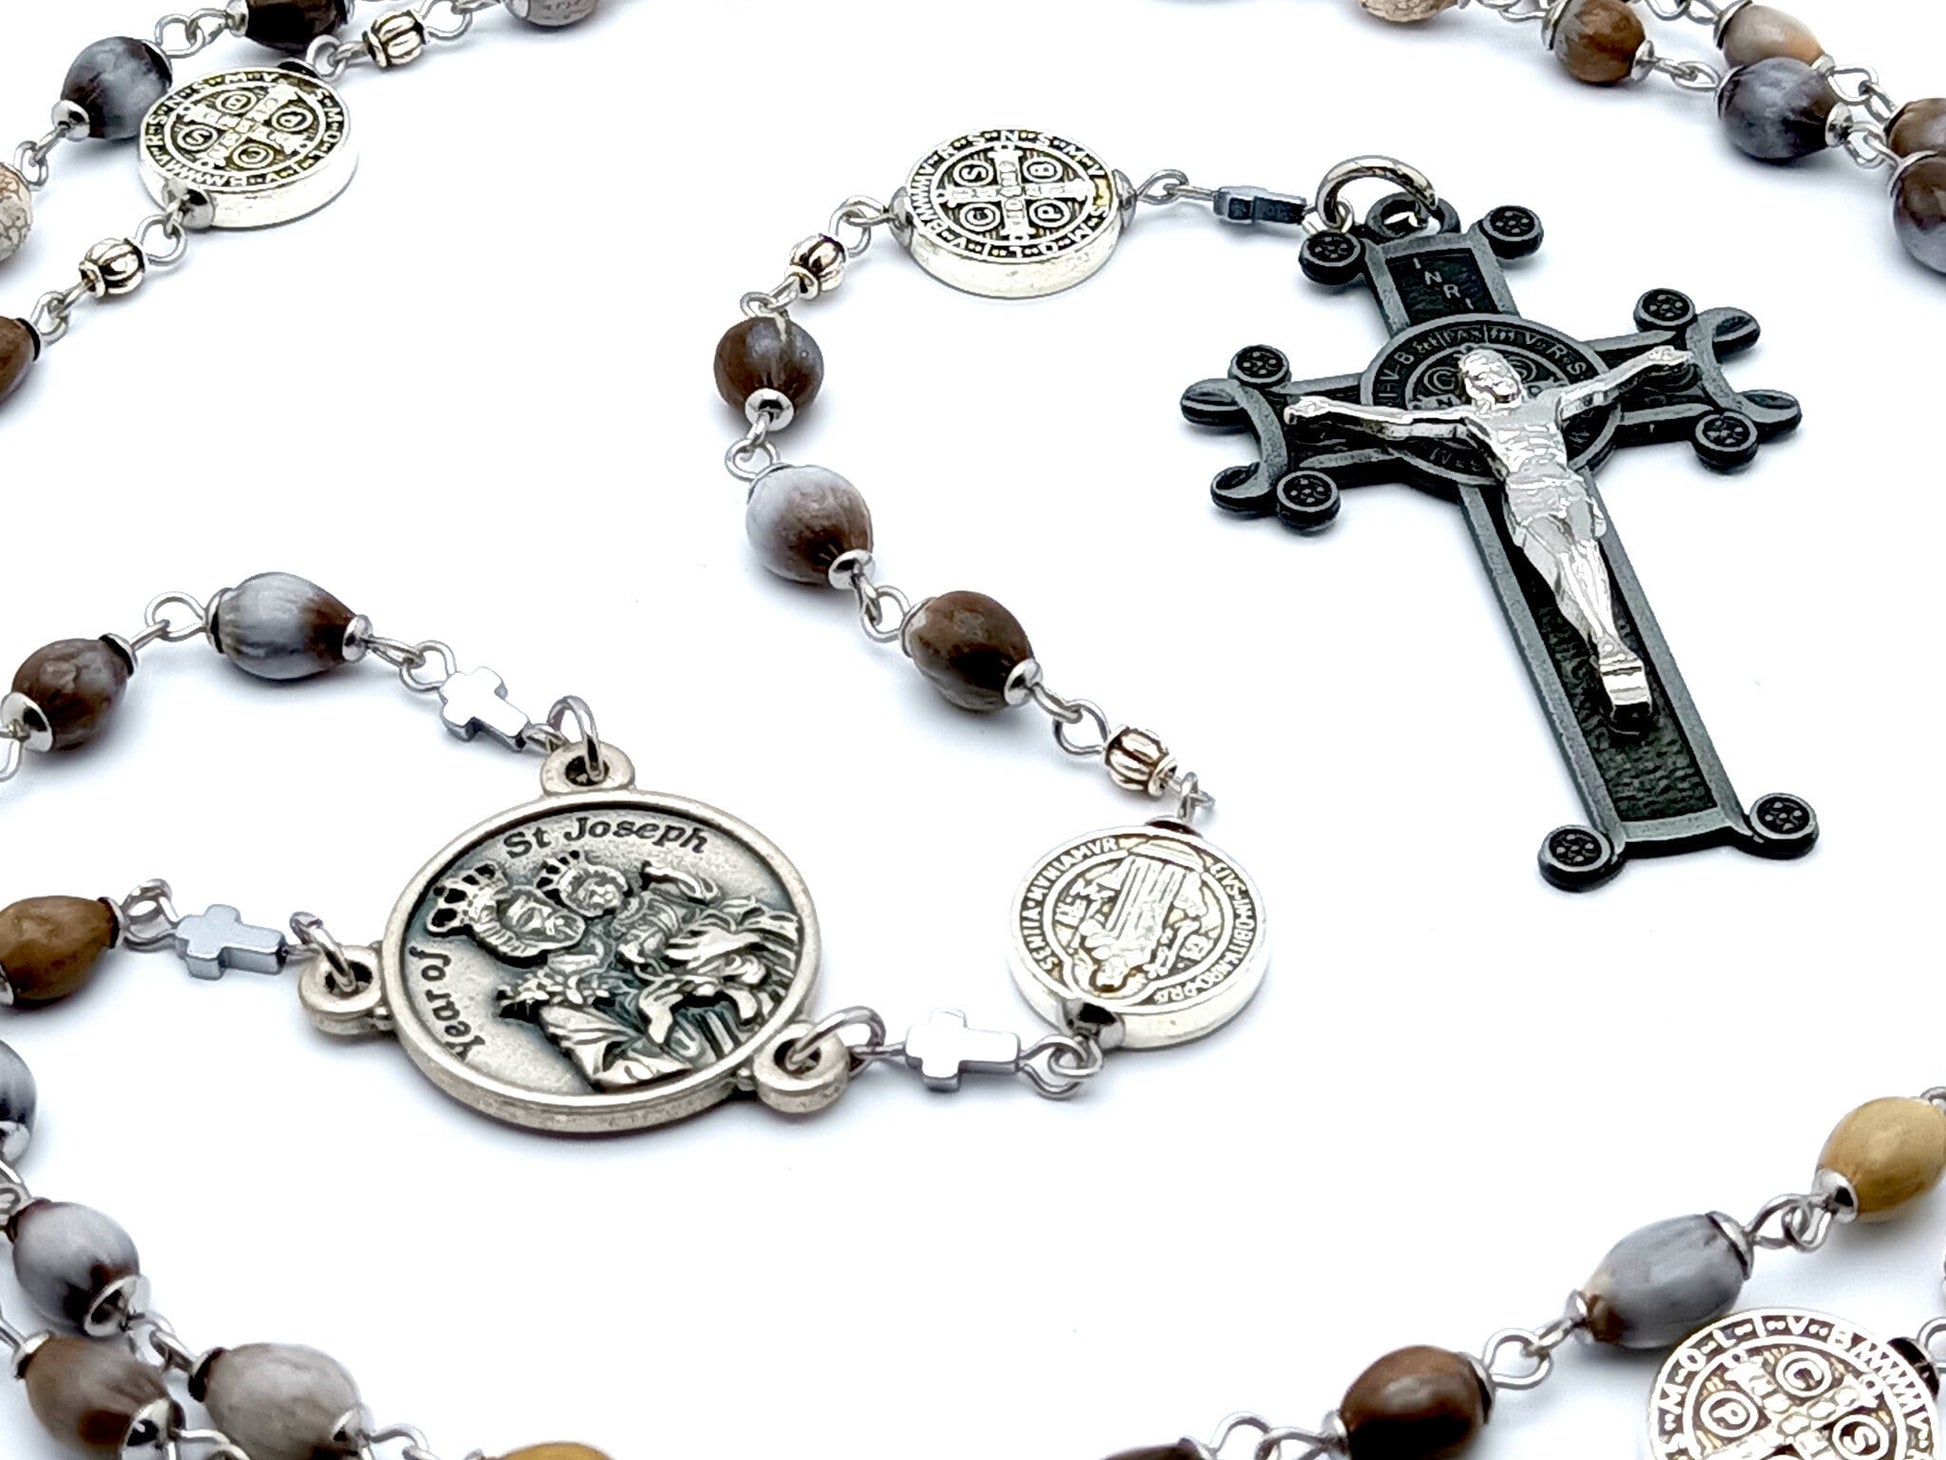 Saint Joseph unique rosary beads with jobs tears and stainless steel Saint Benedict medal beads, large black Saint Benedict crucifix and centre medal.